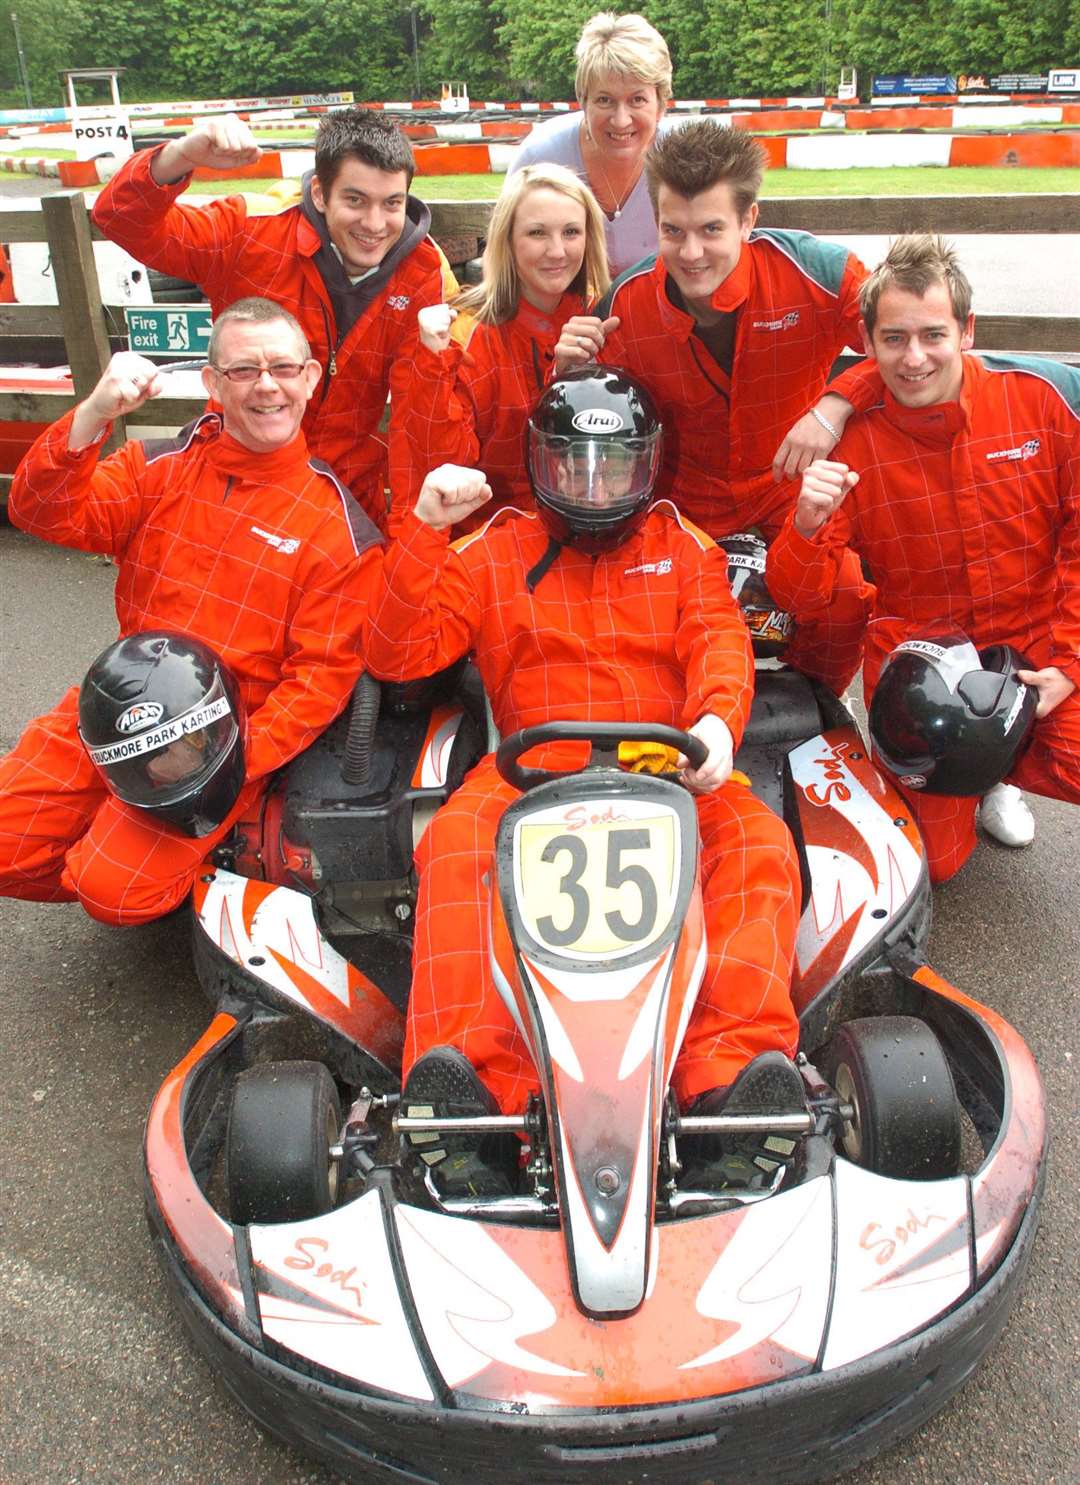 Competitors enjoyed the 2006 'Drive of Your Life' charity event